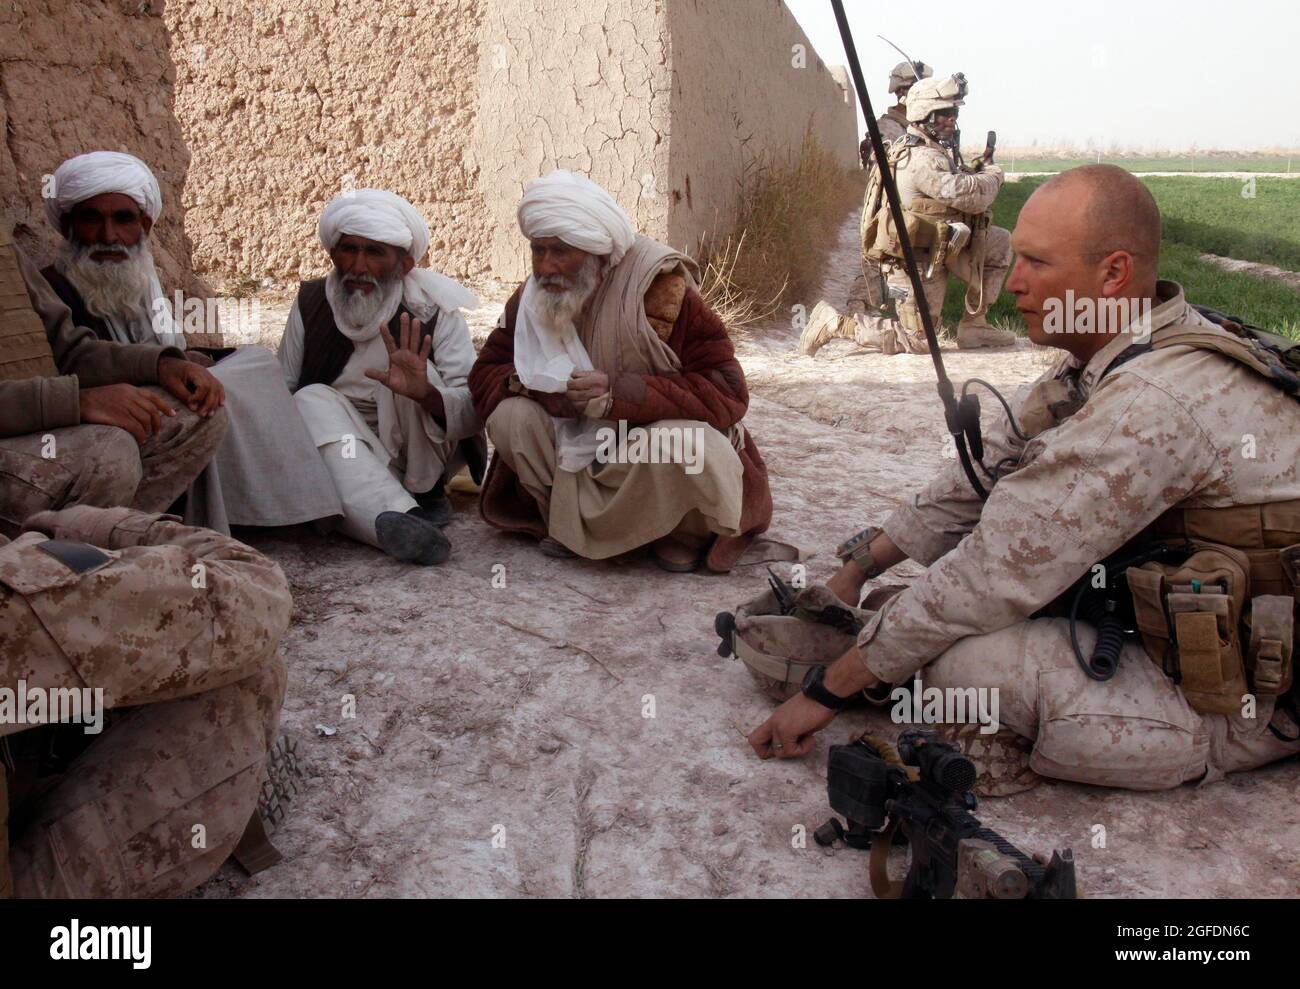 Capt. Stephan P. Karabin, commanding officer, Charlie Company, 1st Battalion, 3rd Marine Regiment, makes first contact with three village elders from the Five Points area during a patrol Feb. 14.  Marines had been previously unable to meet with local leaders due to engagements with Taliban fighters during their patrols.  Karabin, 30, is from West Palm Beach, Fla. Stock Photo